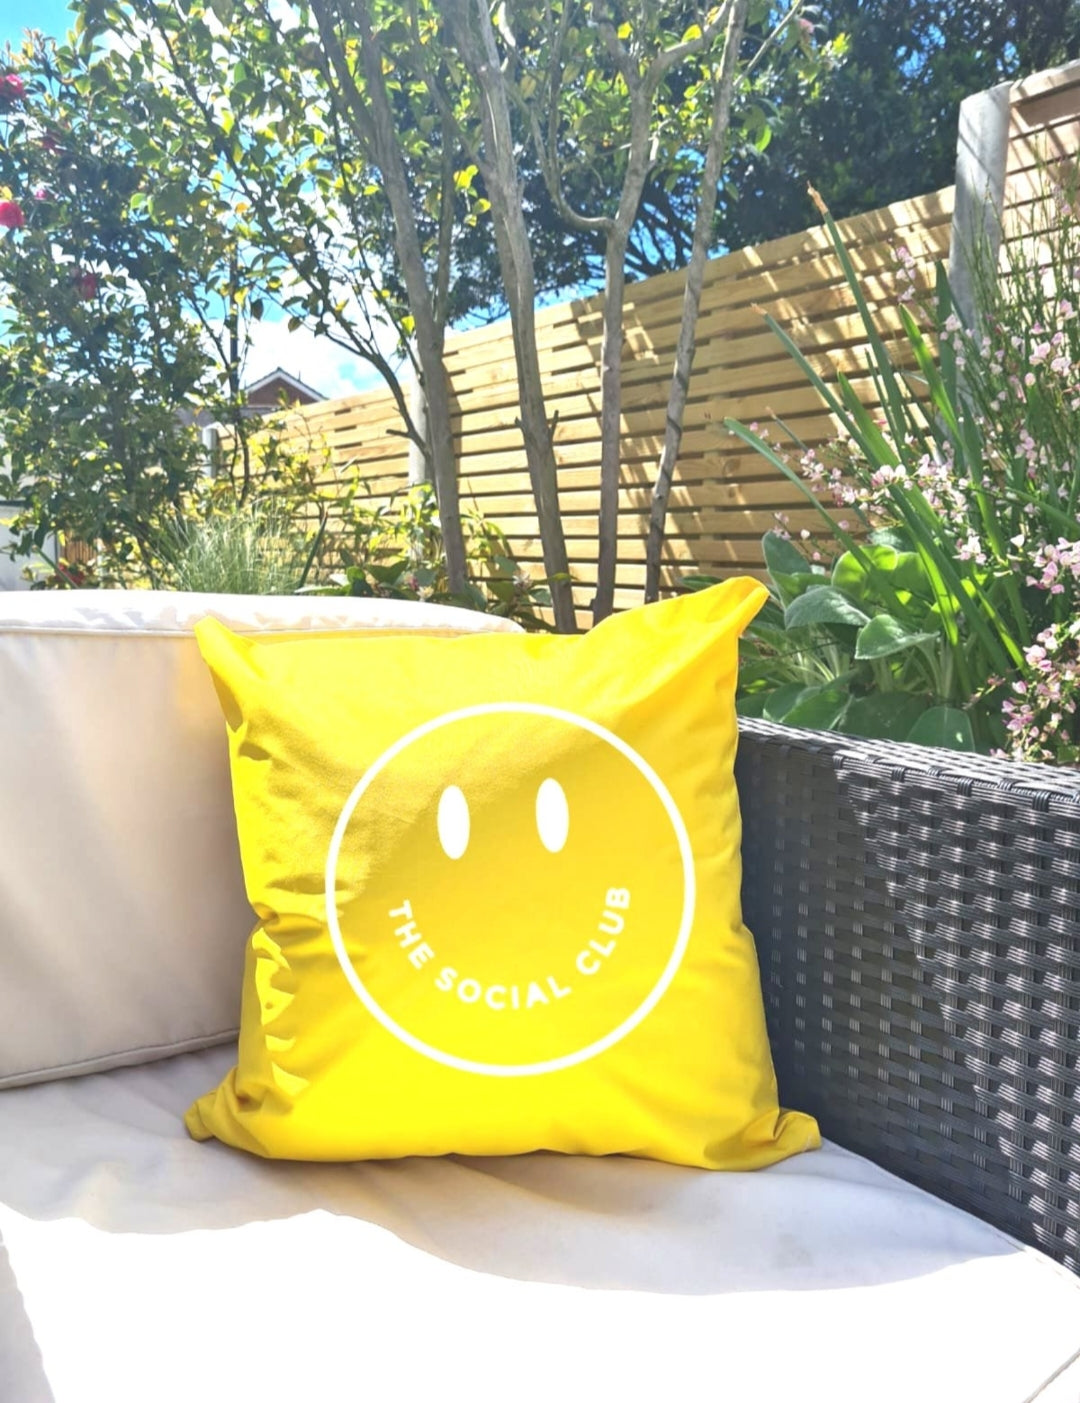 Yellow & White Xtra-Happy water resistant Cushion